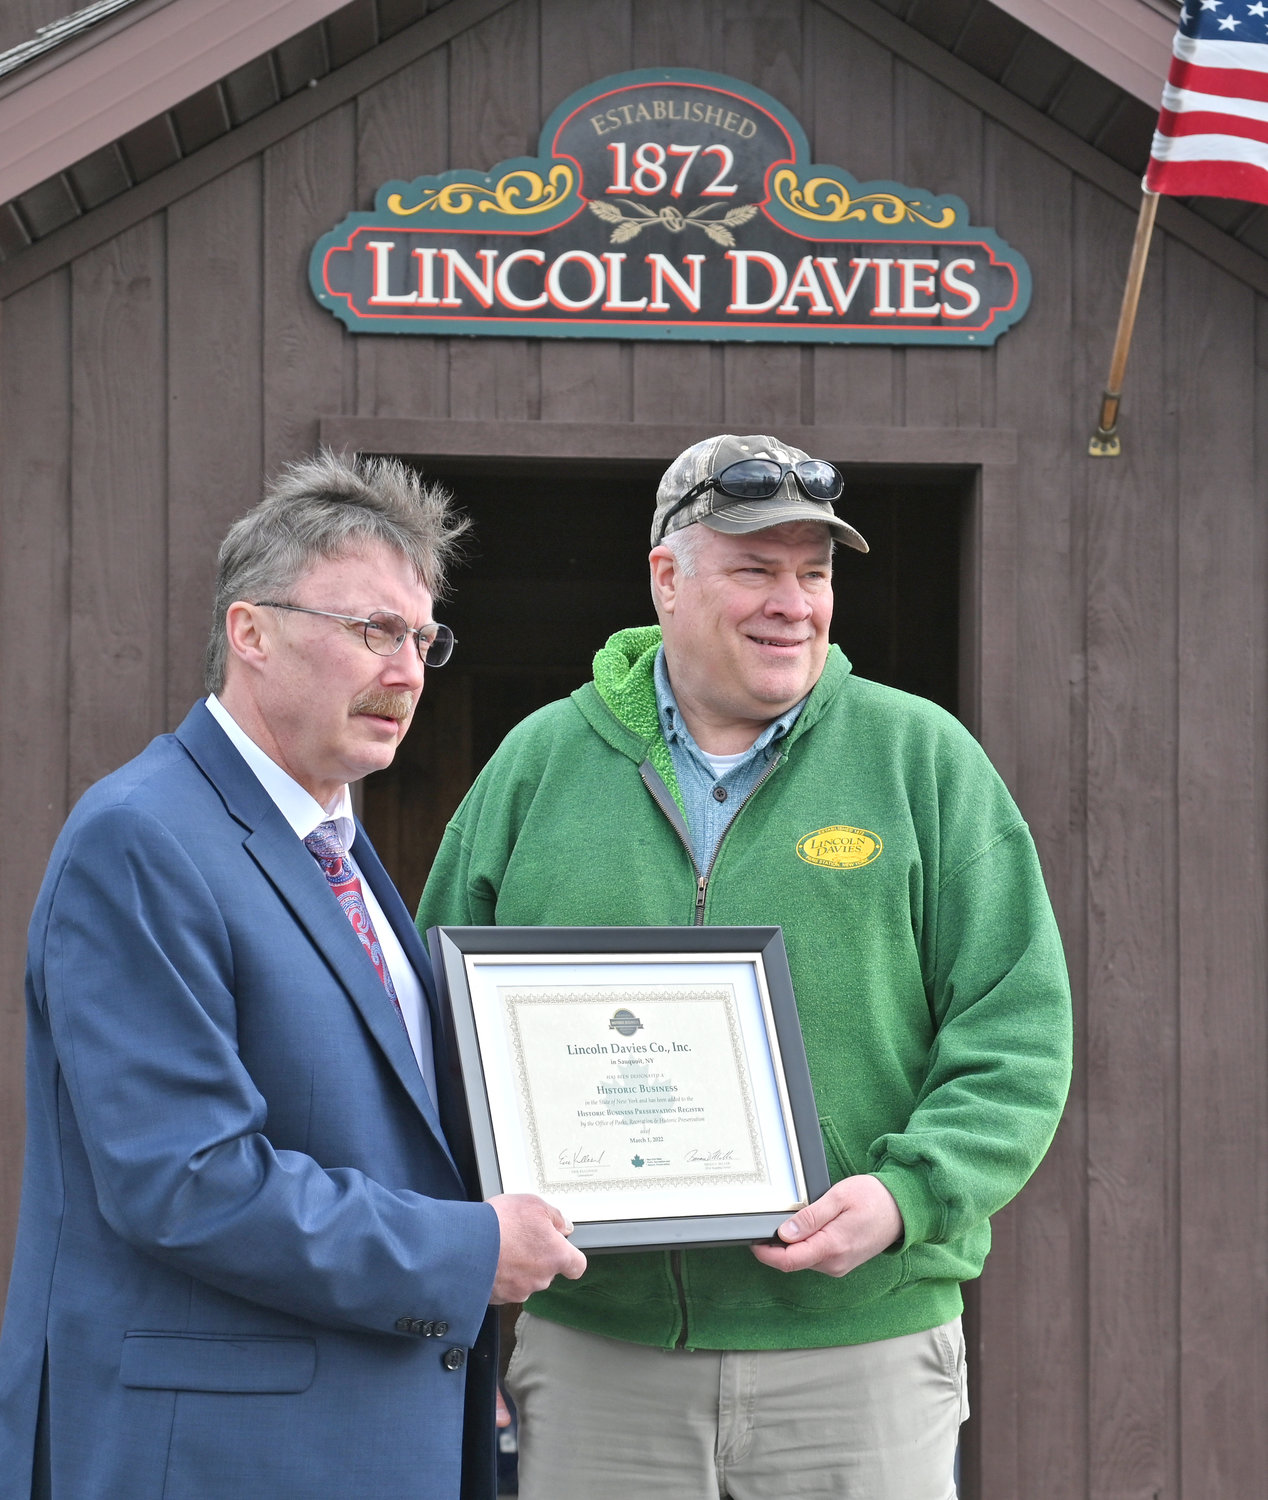 HERE’S TO HISTORY — Assemblyman Brian Miller, R-101, New Hartford, left, presents Ed Jones, owner of Lincoln Davies Company, with its historic business recognition certificate during a ceremony on Friday. The company, located at 8689 Summit Road in Sauquoit, was named to the New York State Historic Business Preservation Registry.